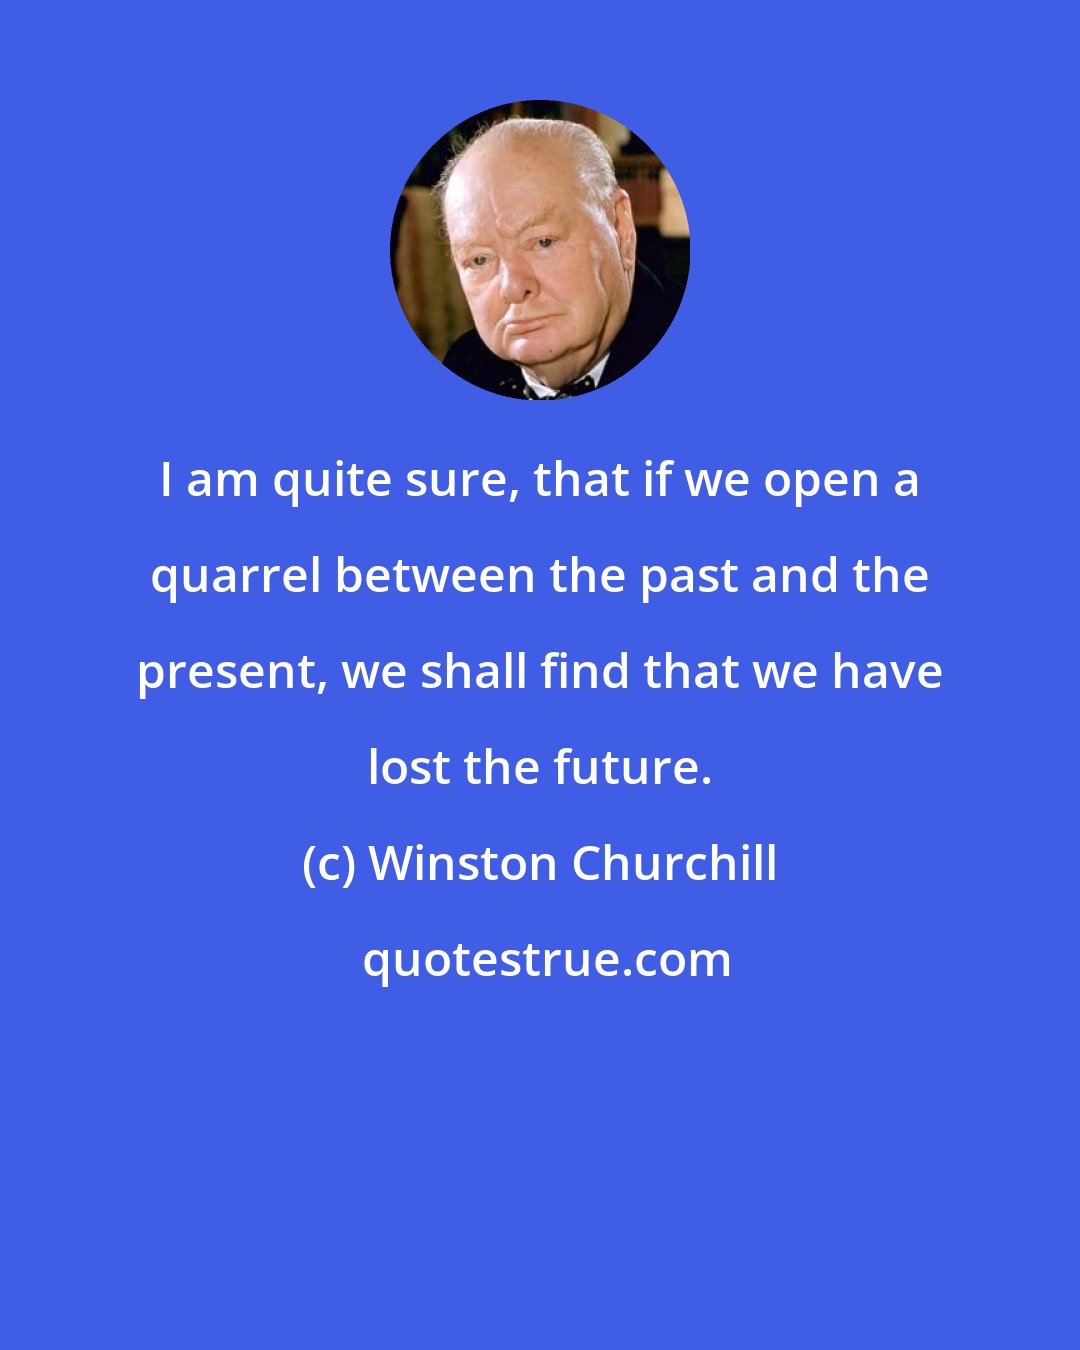 Winston Churchill: I am quite sure, that if we open a quarrel between the past and the present, we shall find that we have lost the future.